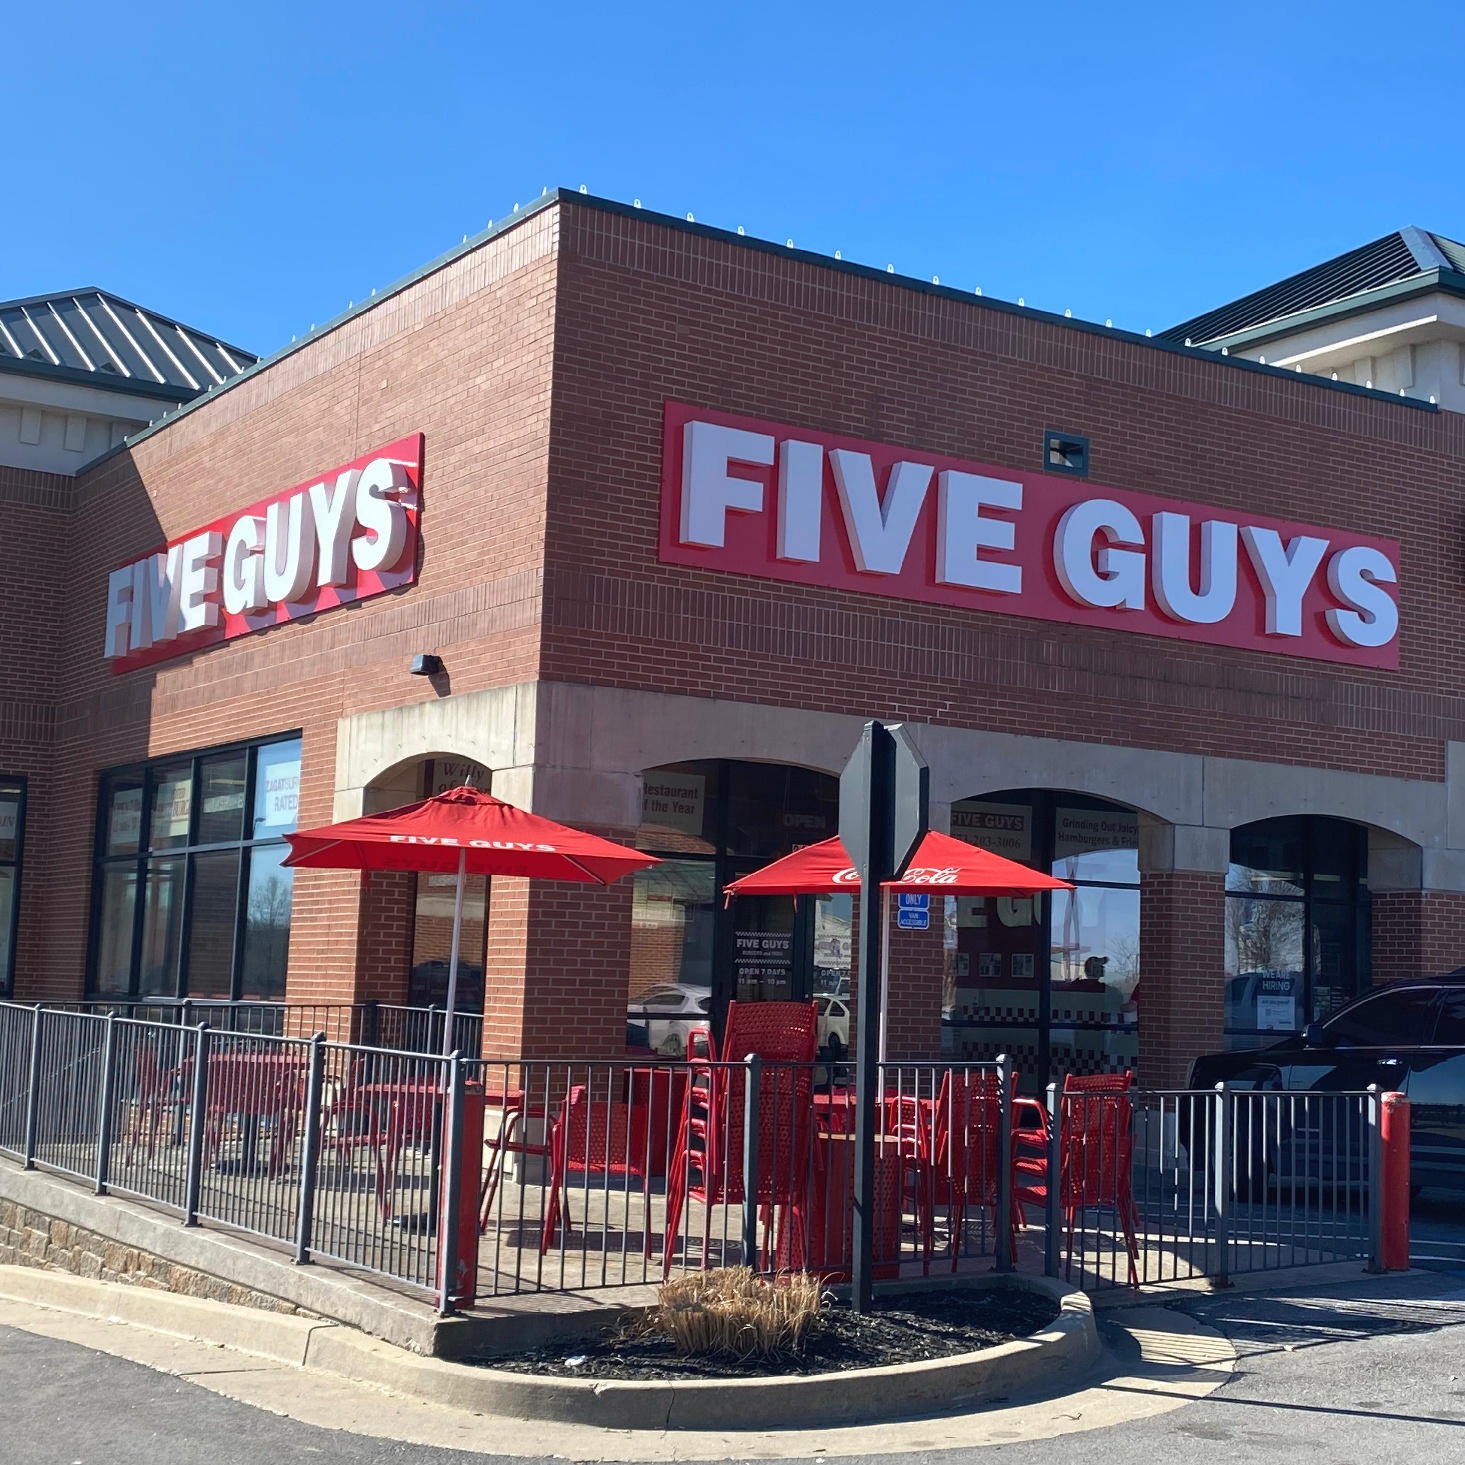 Come from Istanbul, impressed - Review of Five Guys, Allen Park, MI -  Tripadvisor